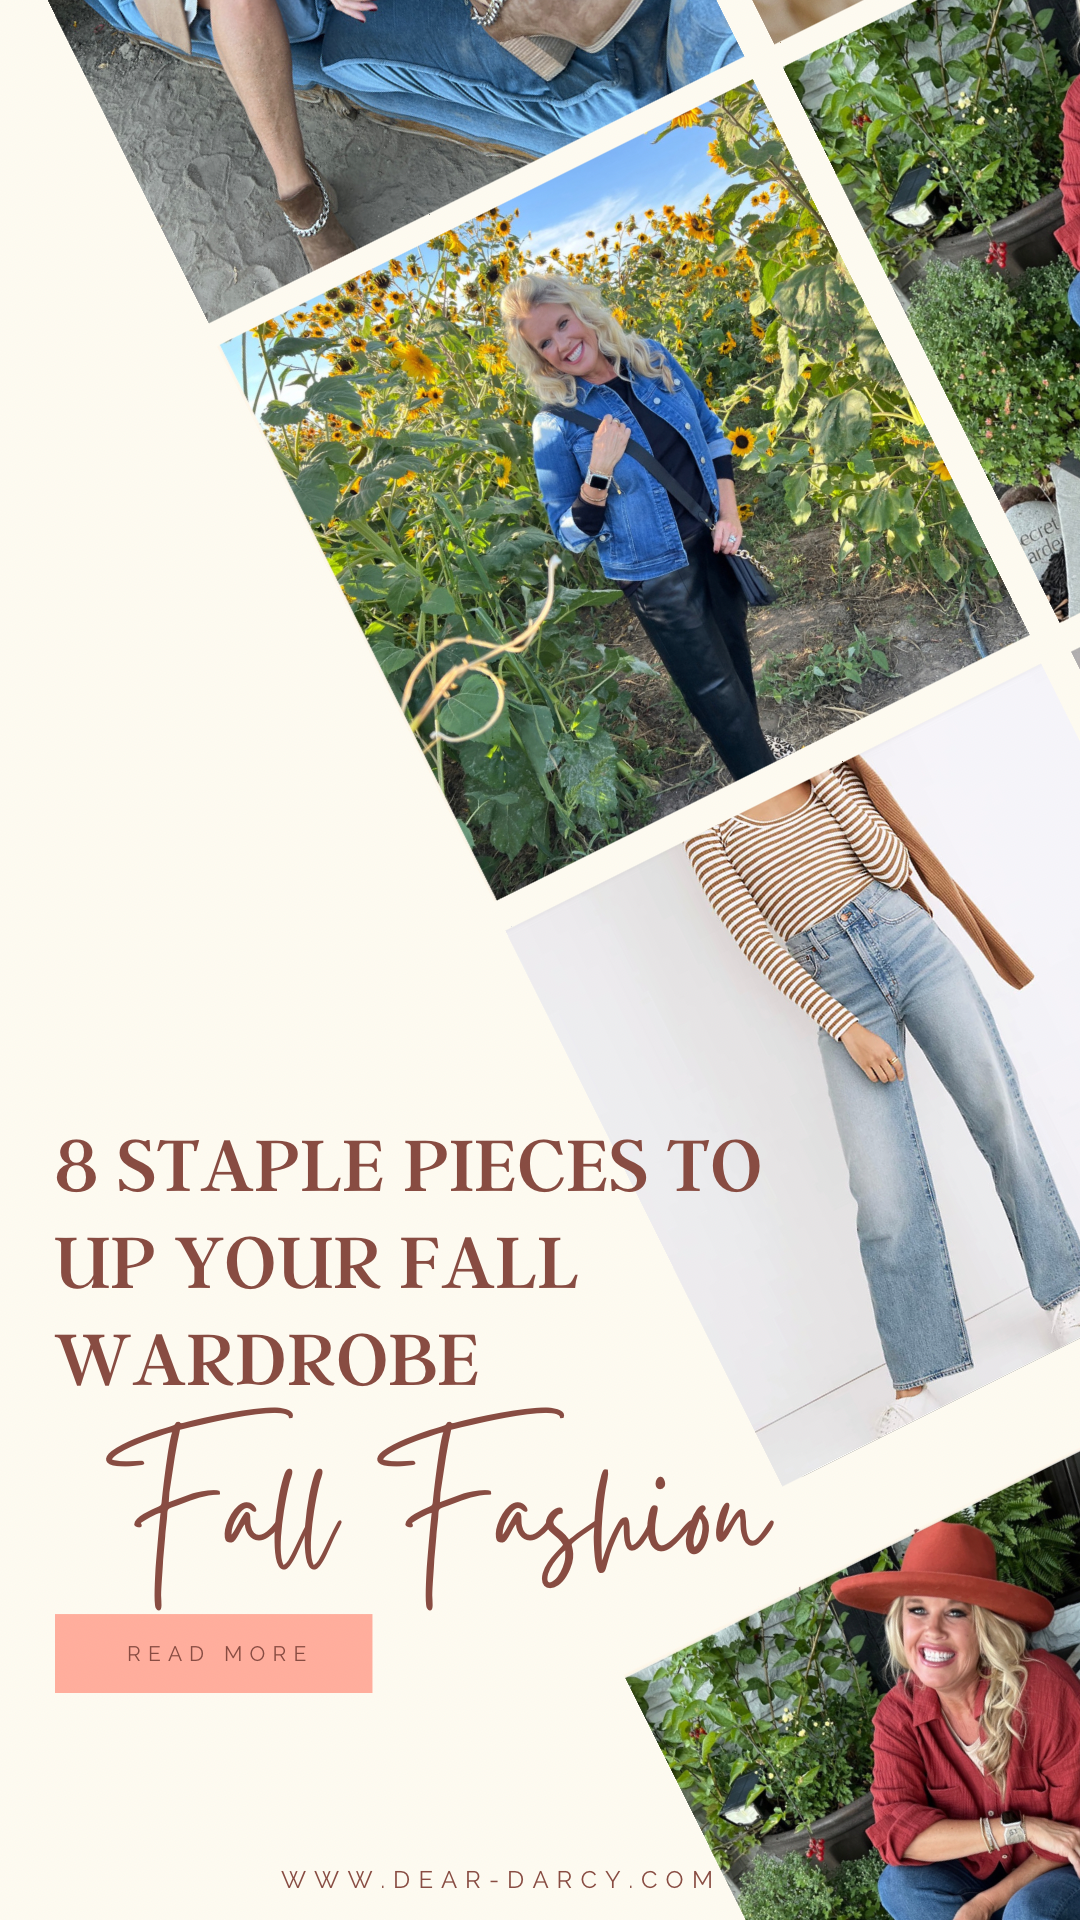 8 Staple pieces to UP your Fall Wardrobe 